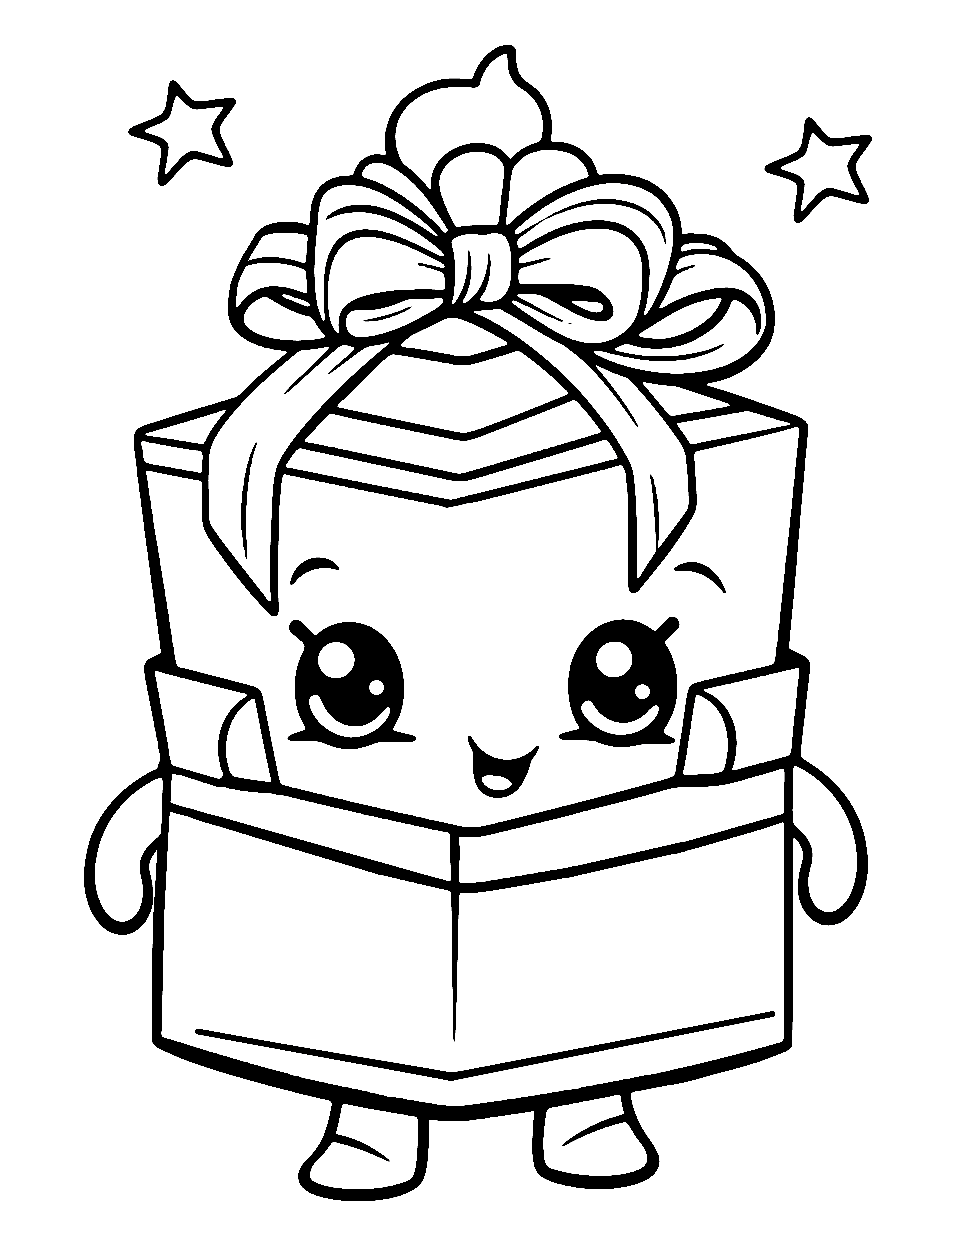 Gift Box Shopkin Coloring Page - A large gift box looking Shopkin with a cool design and color.